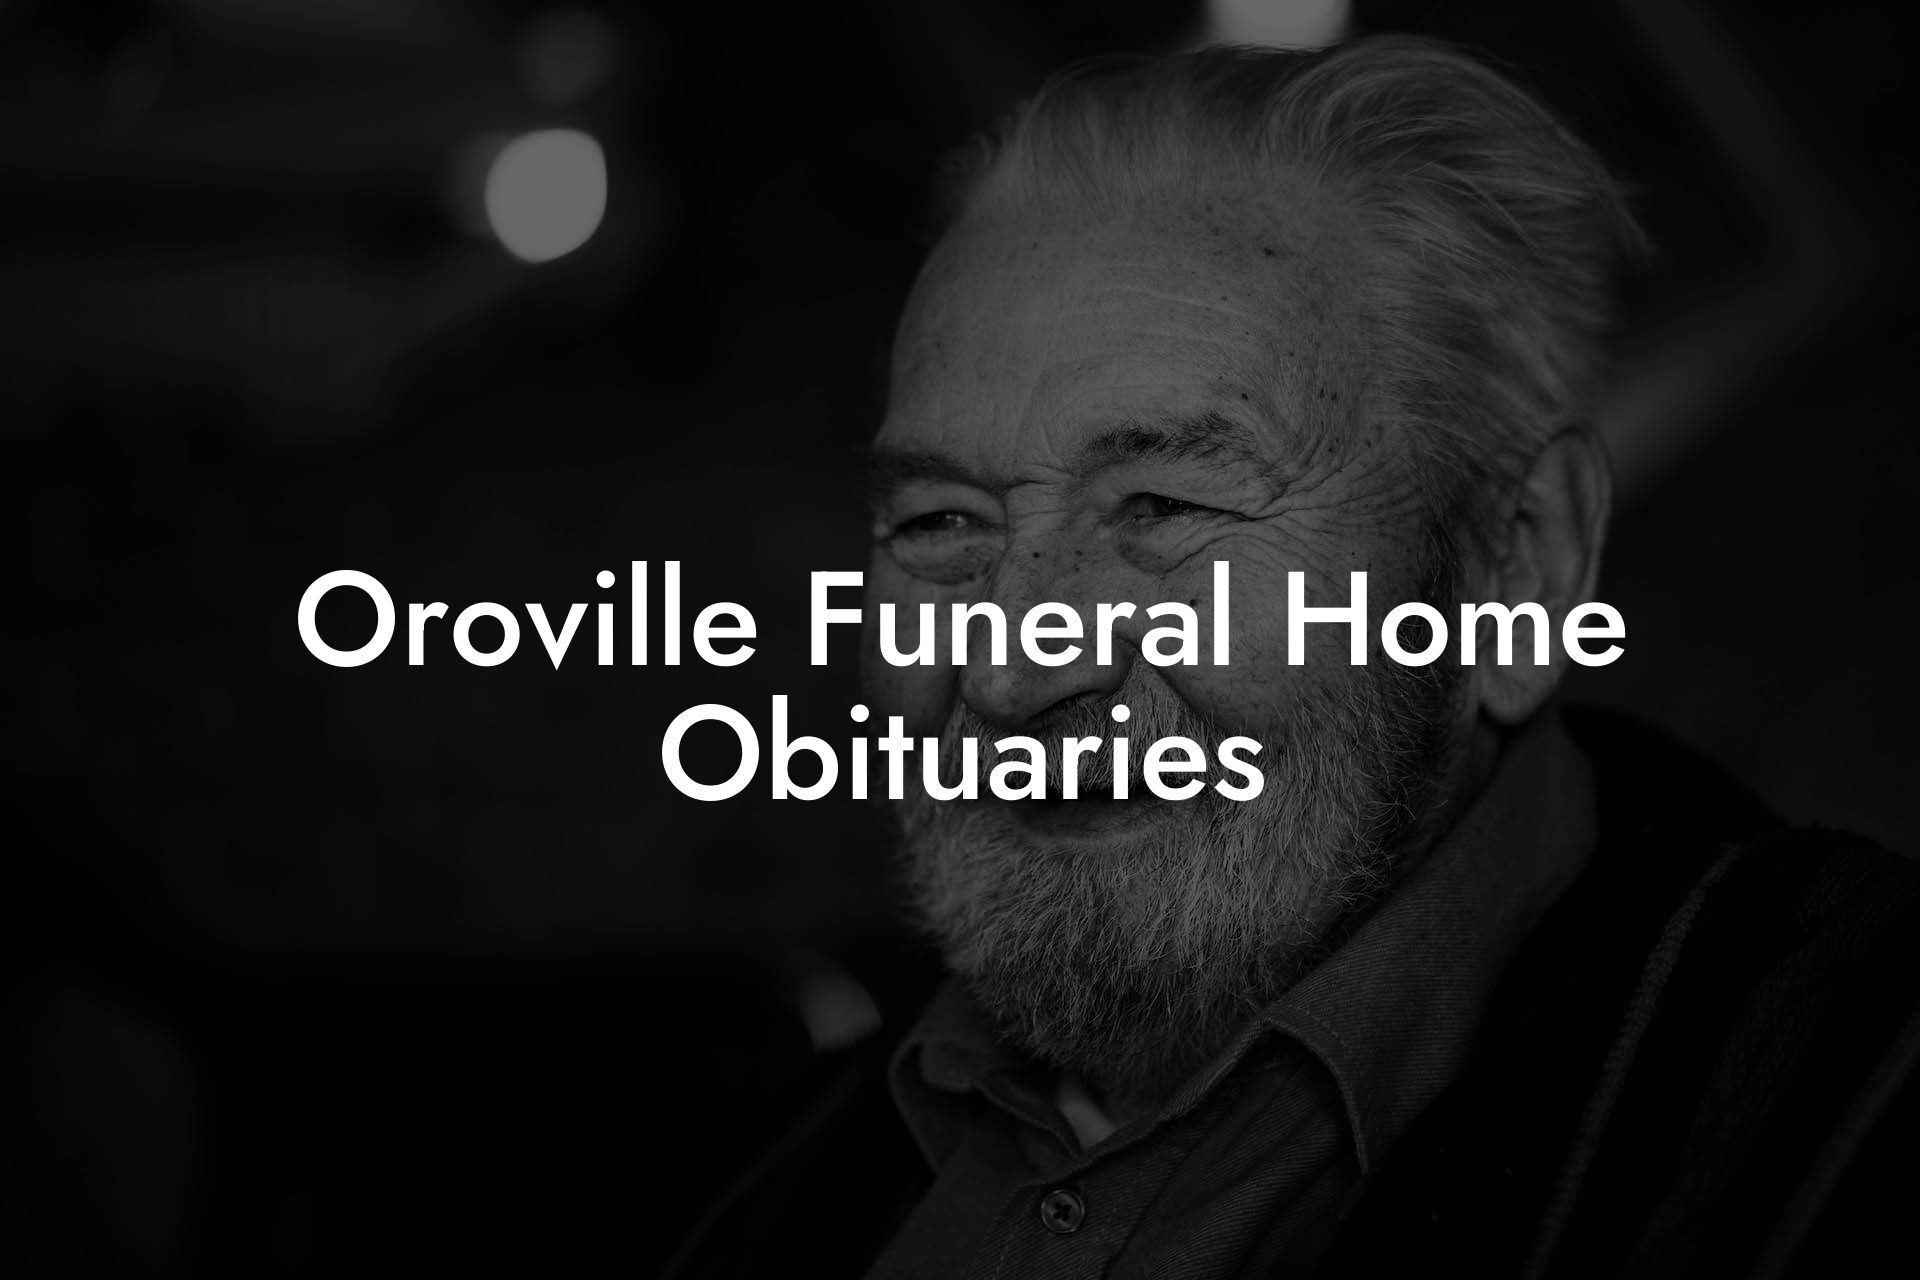 Oroville Funeral Home Obituaries